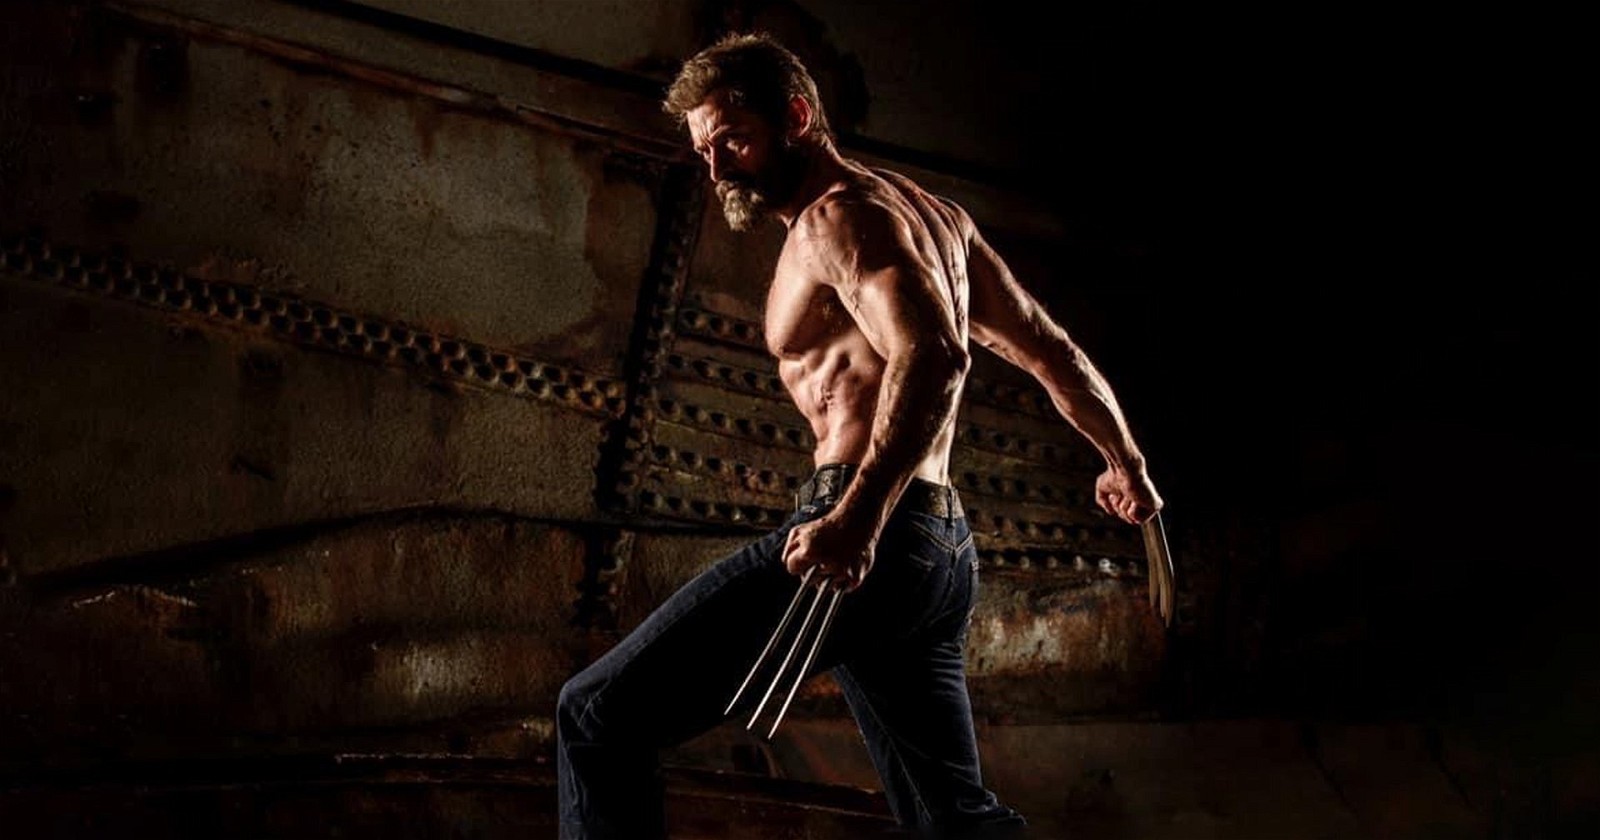 Hugh Jackman as Wolverine in the Fox Universe and the MCU.